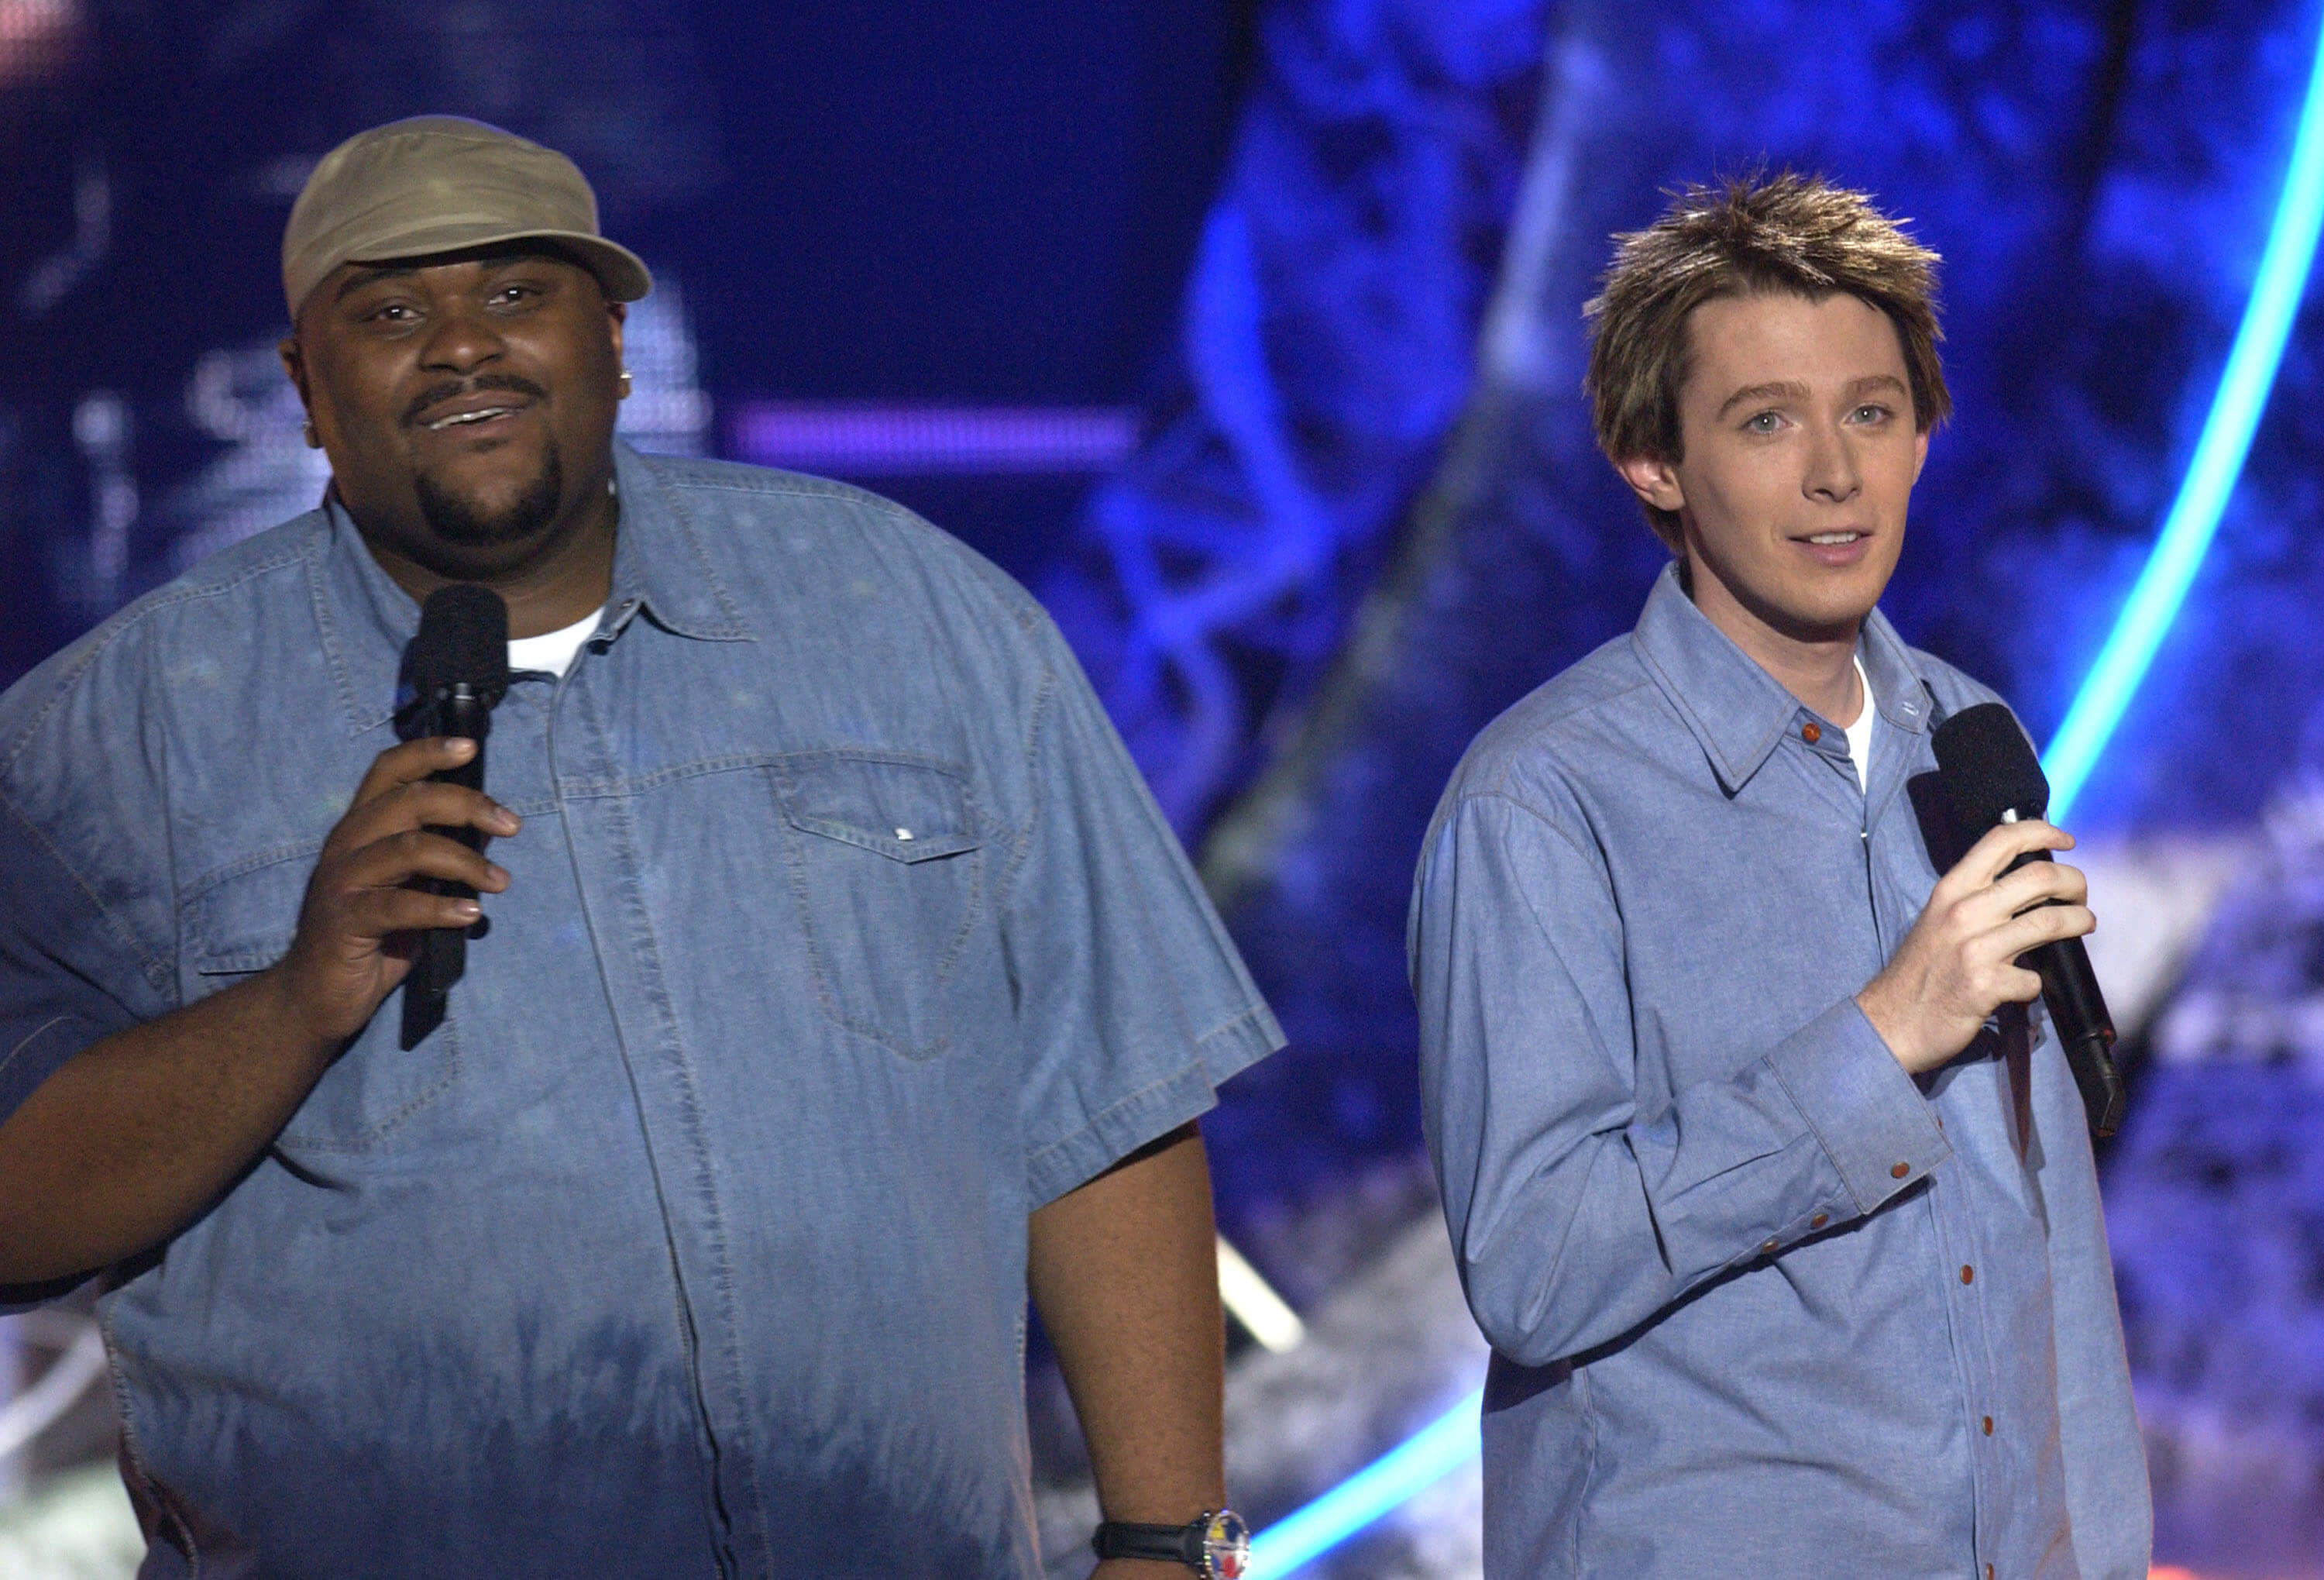 ‘American Idol’: Ruben Studdard and Clay Aiken Will Appear During the Season 21 Finale